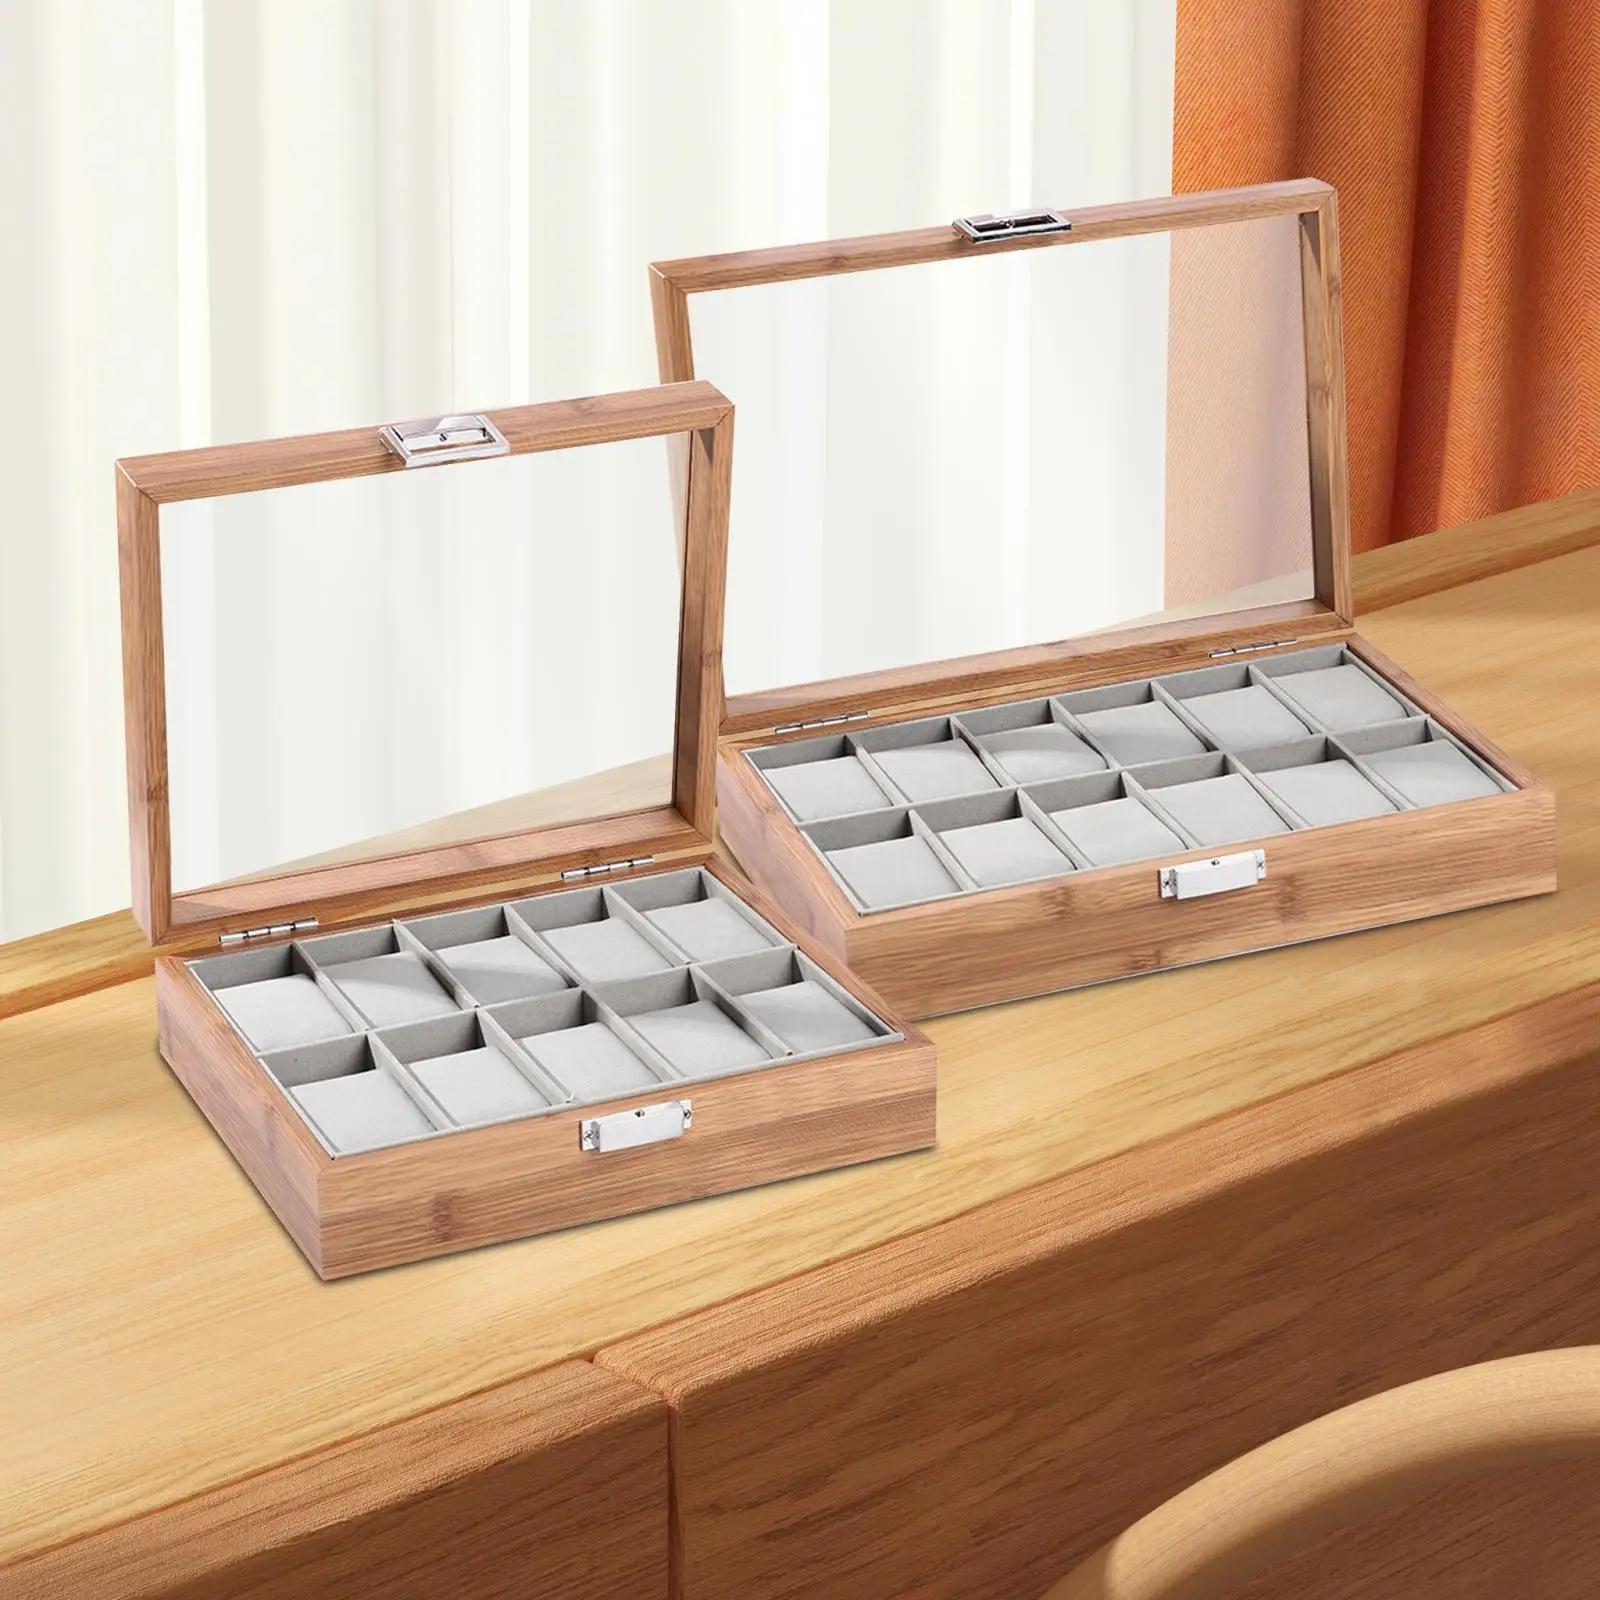 Watch Box Organizer Multifunctional Container Jewelry Display Case for Men Women Watches Jewelry Display Home Decoration